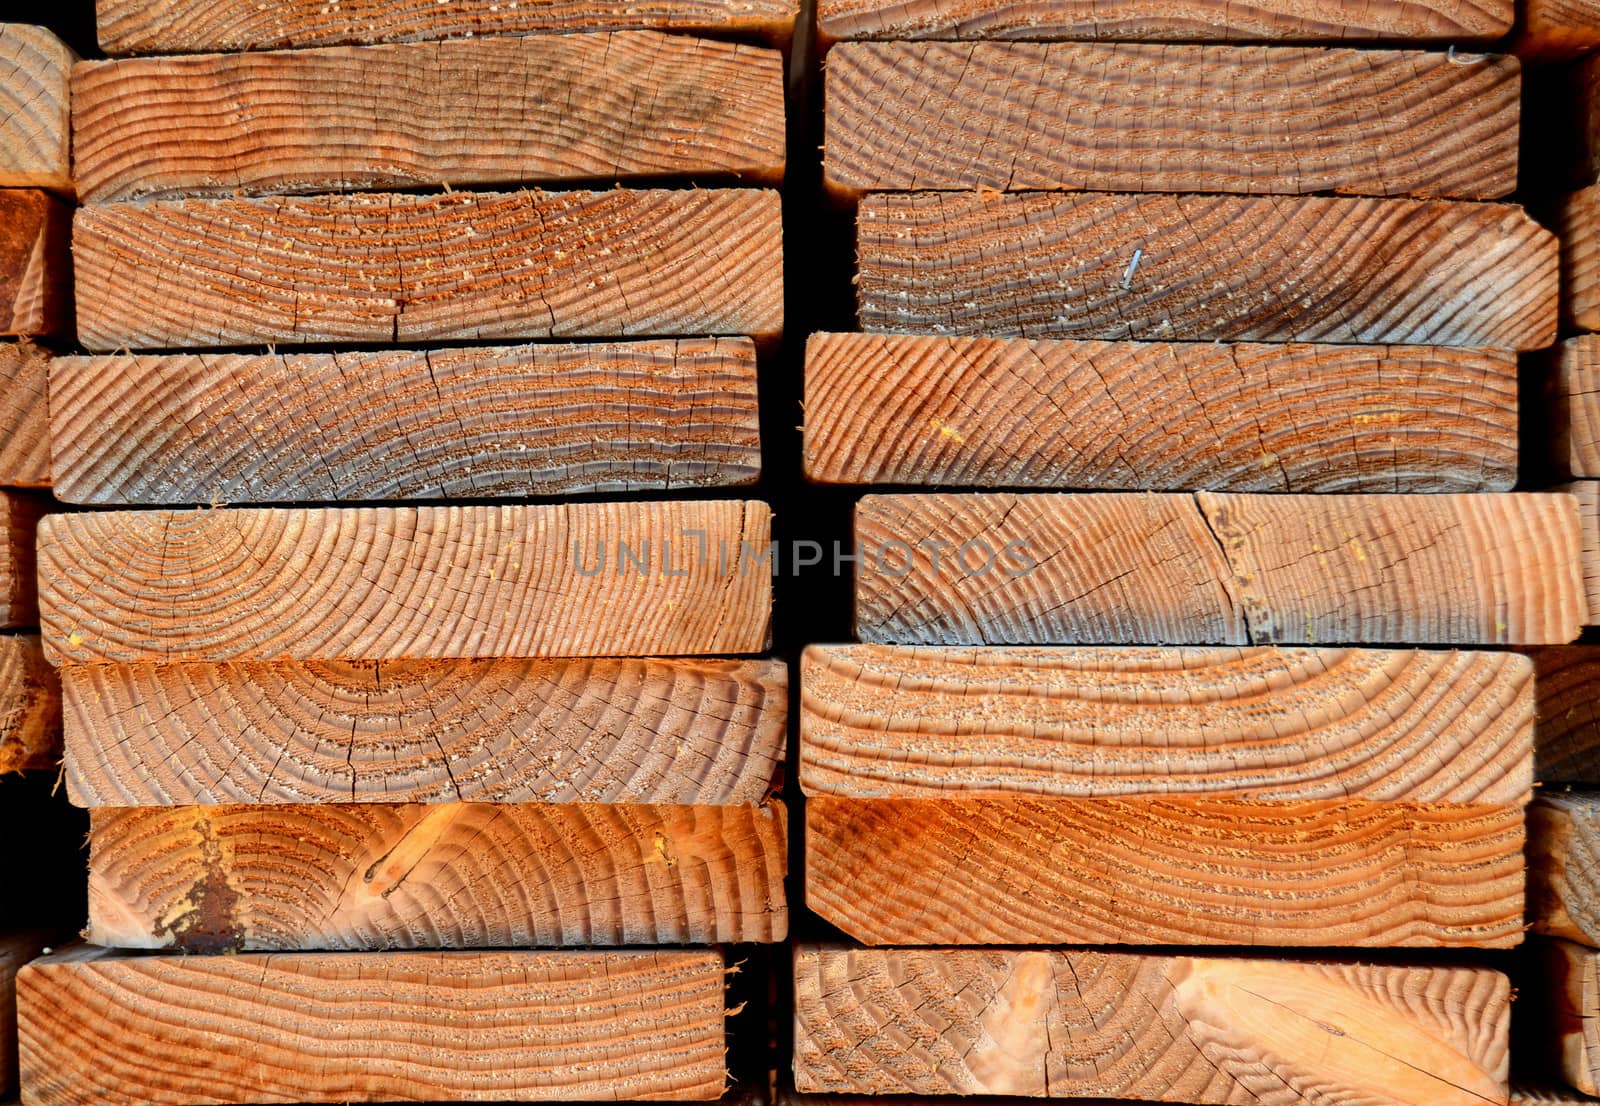 Background Texture Of A Stack Of Timber Planks For The Construction Industry